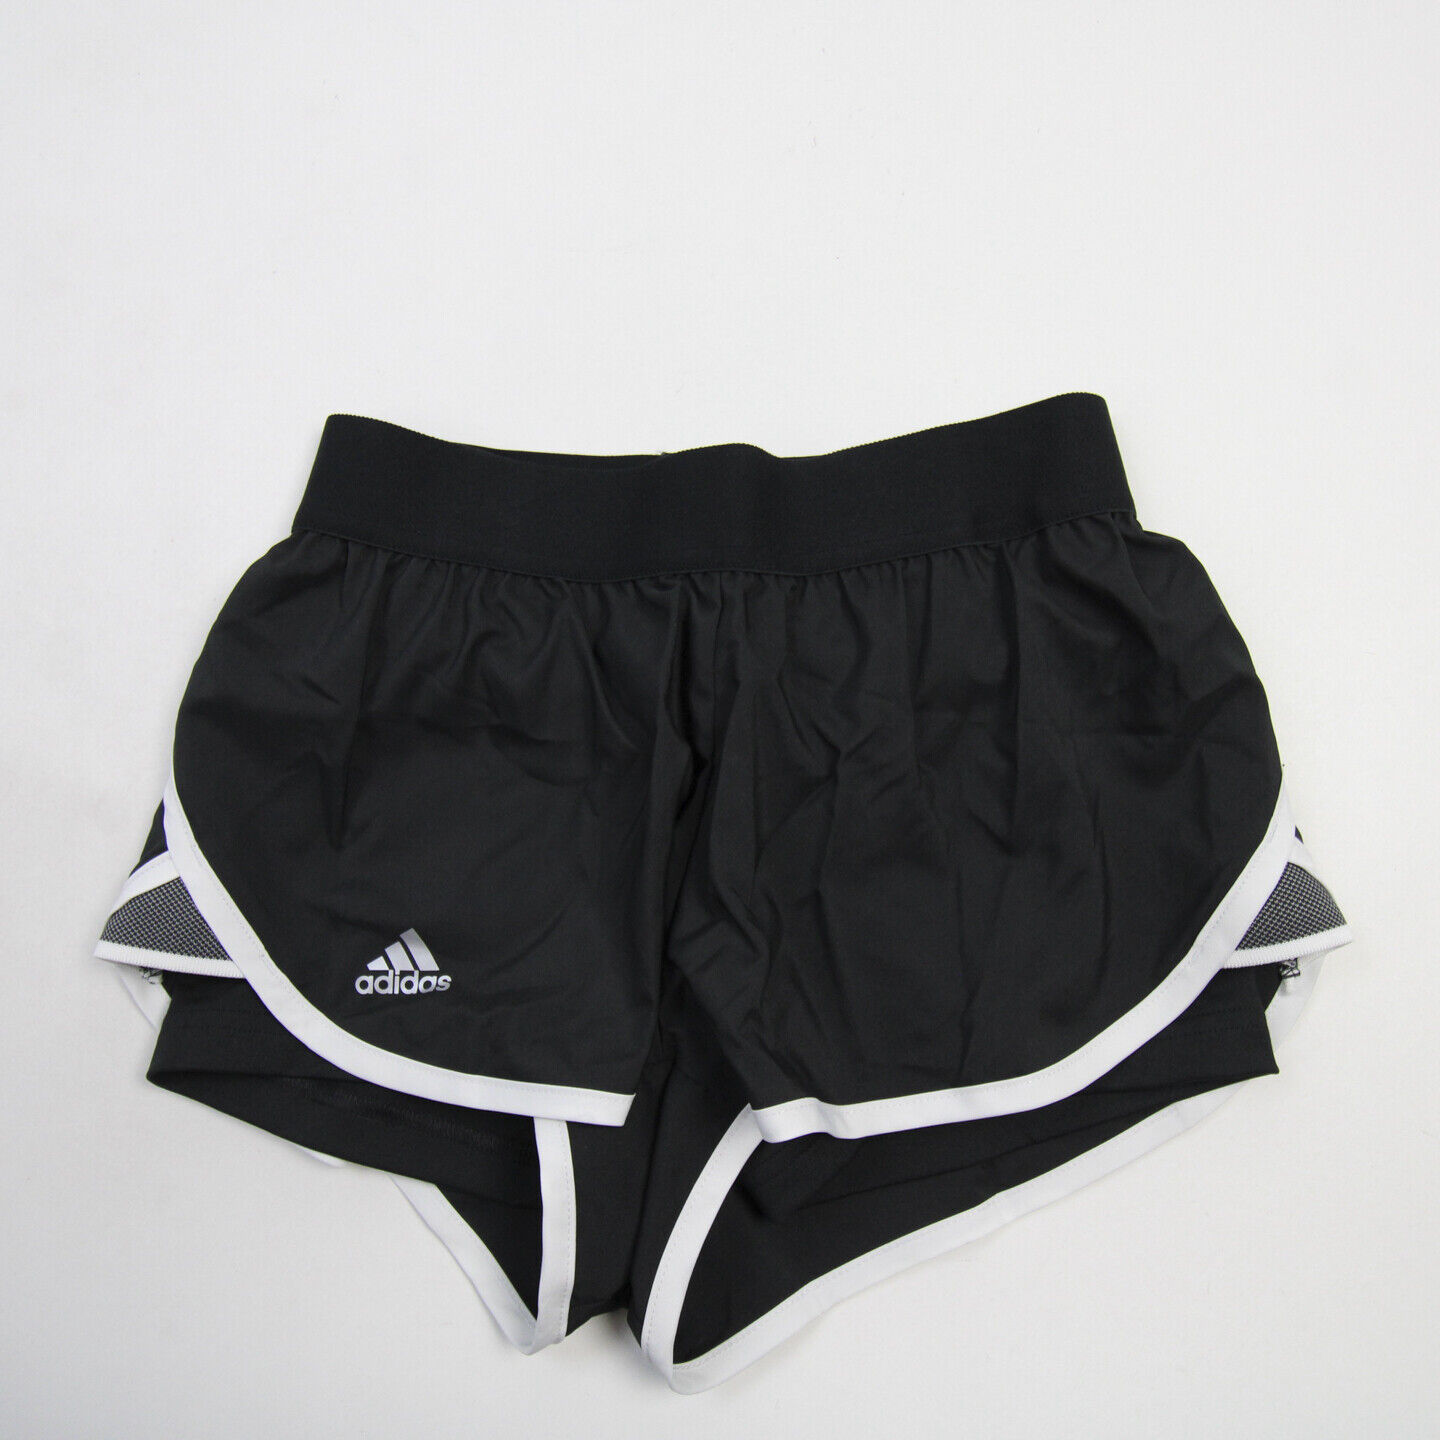 Adidas Climalite Running Short Women's Xs Extra Small Black White New With Tags